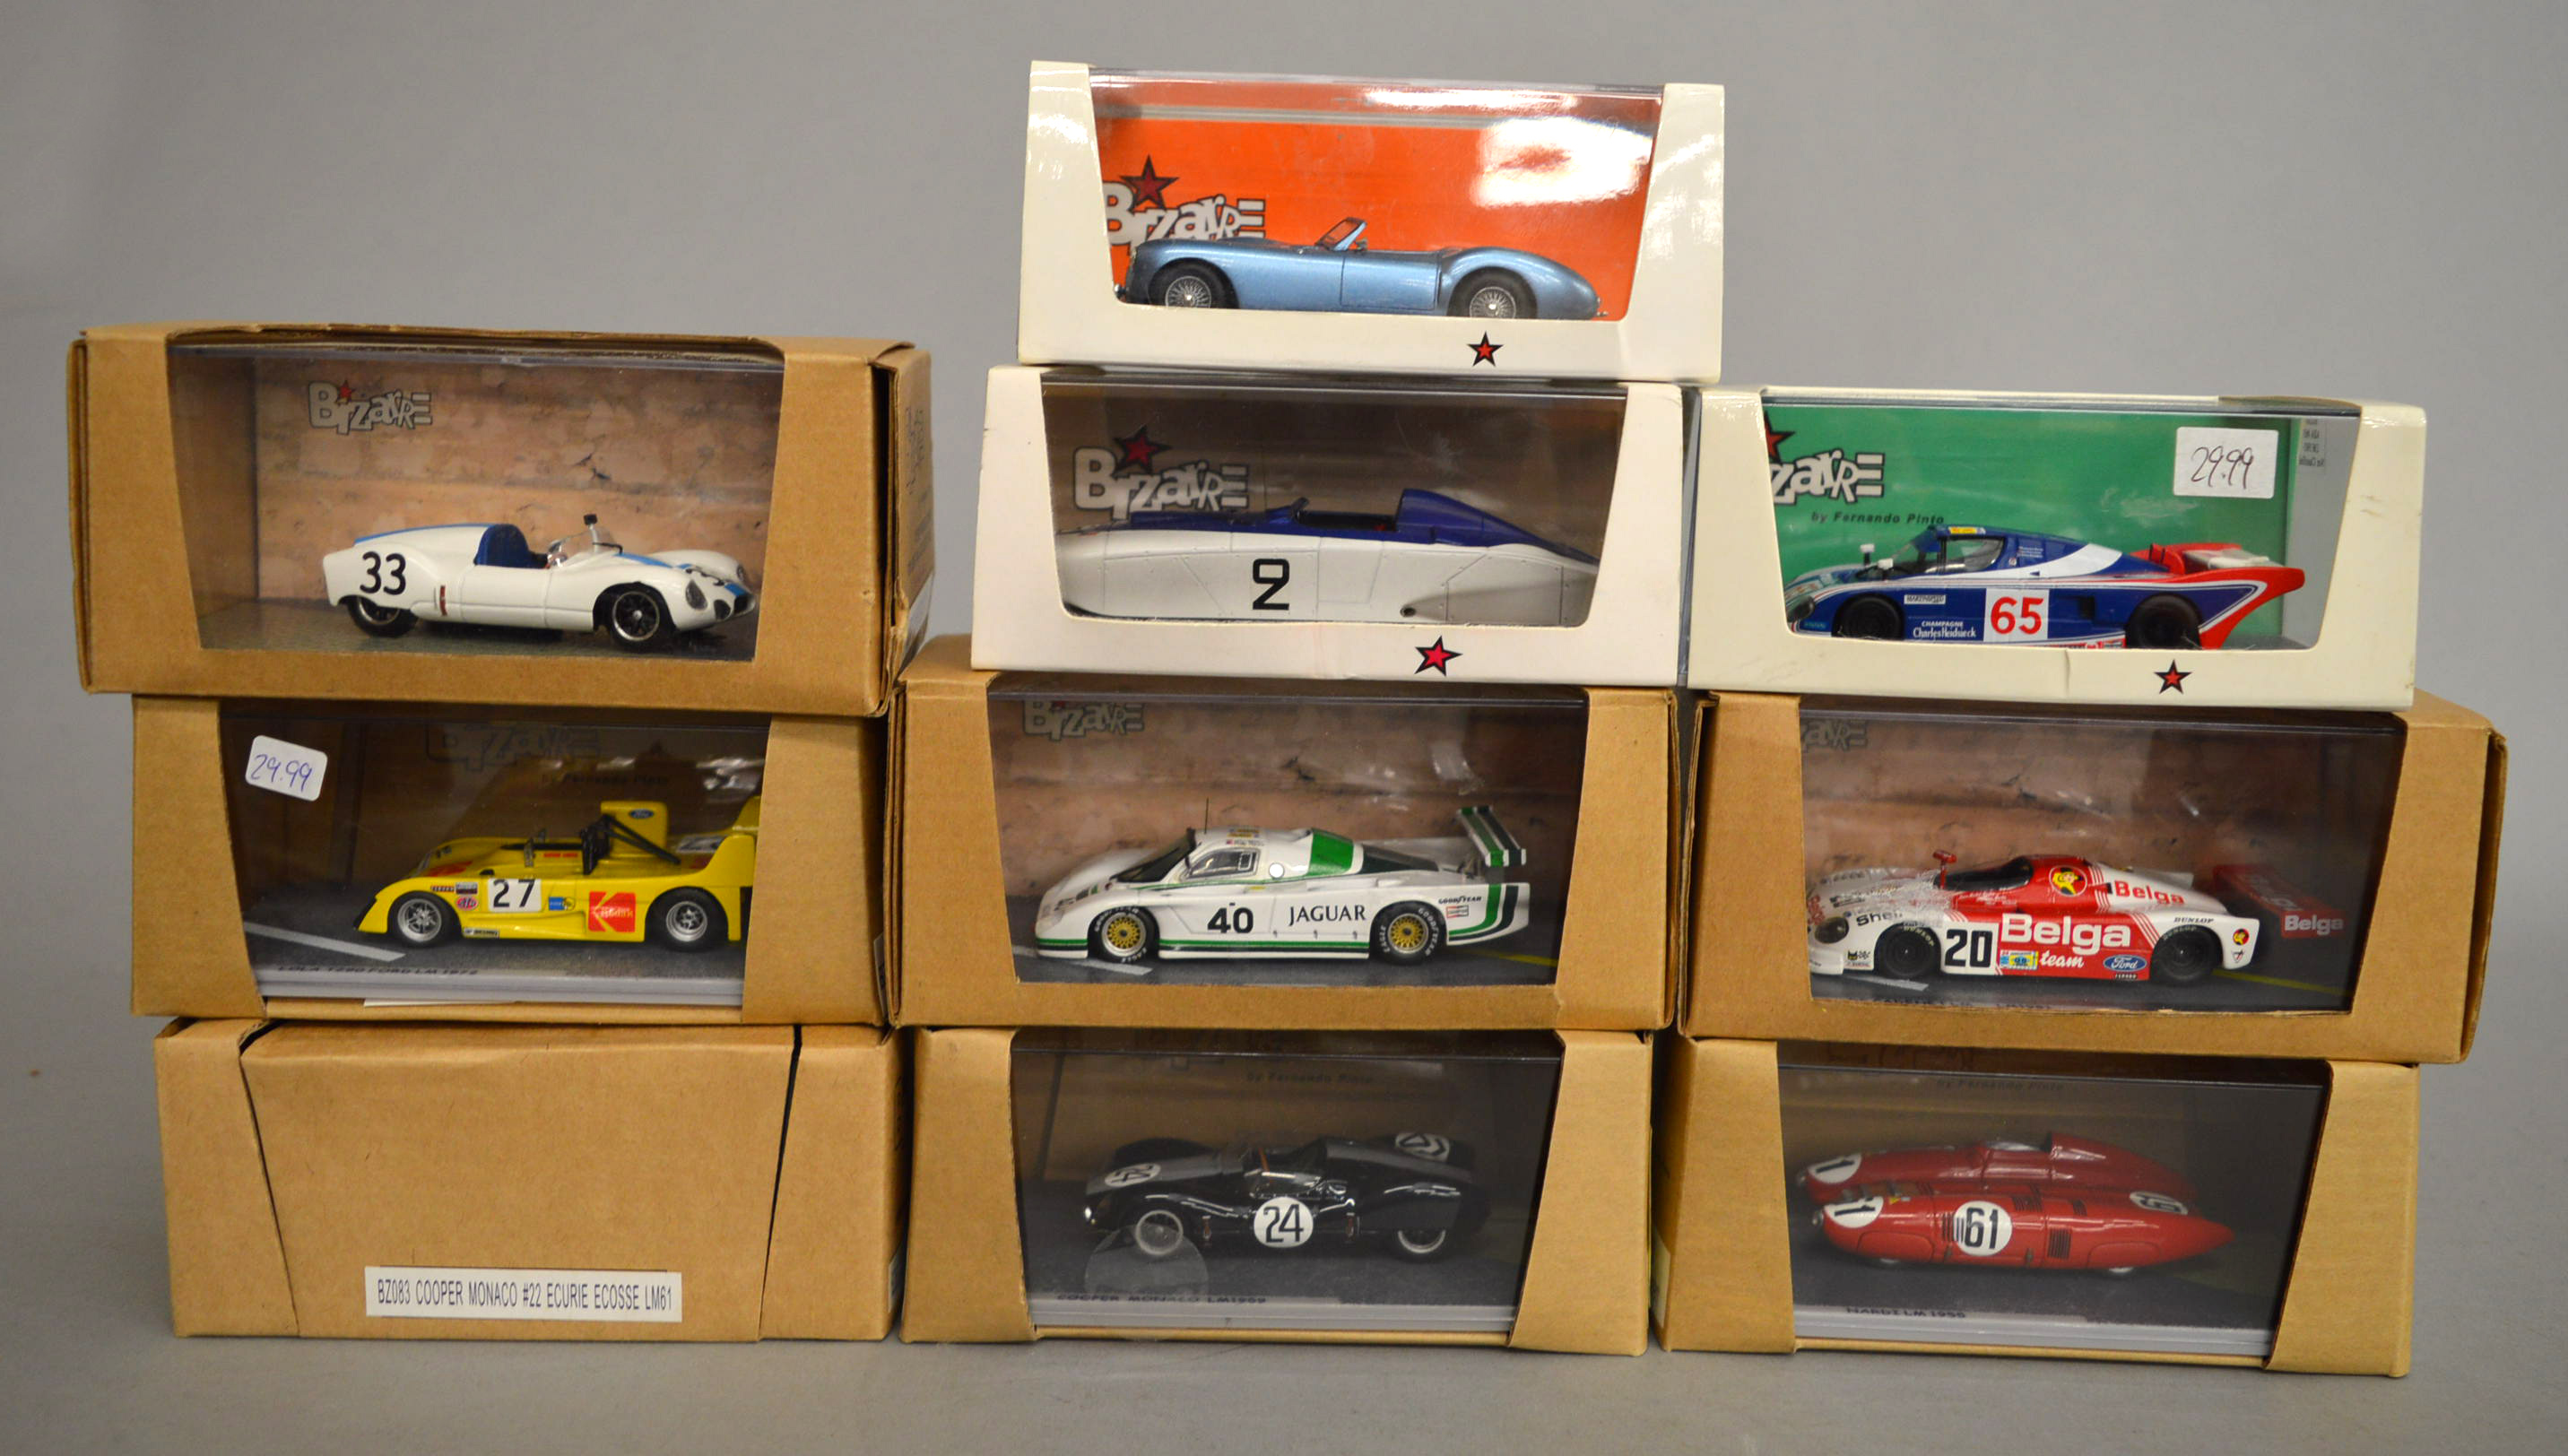 10 x Bizarre by Fernando Pinto 1:43 scale diecast model cars. Overall appear VG.